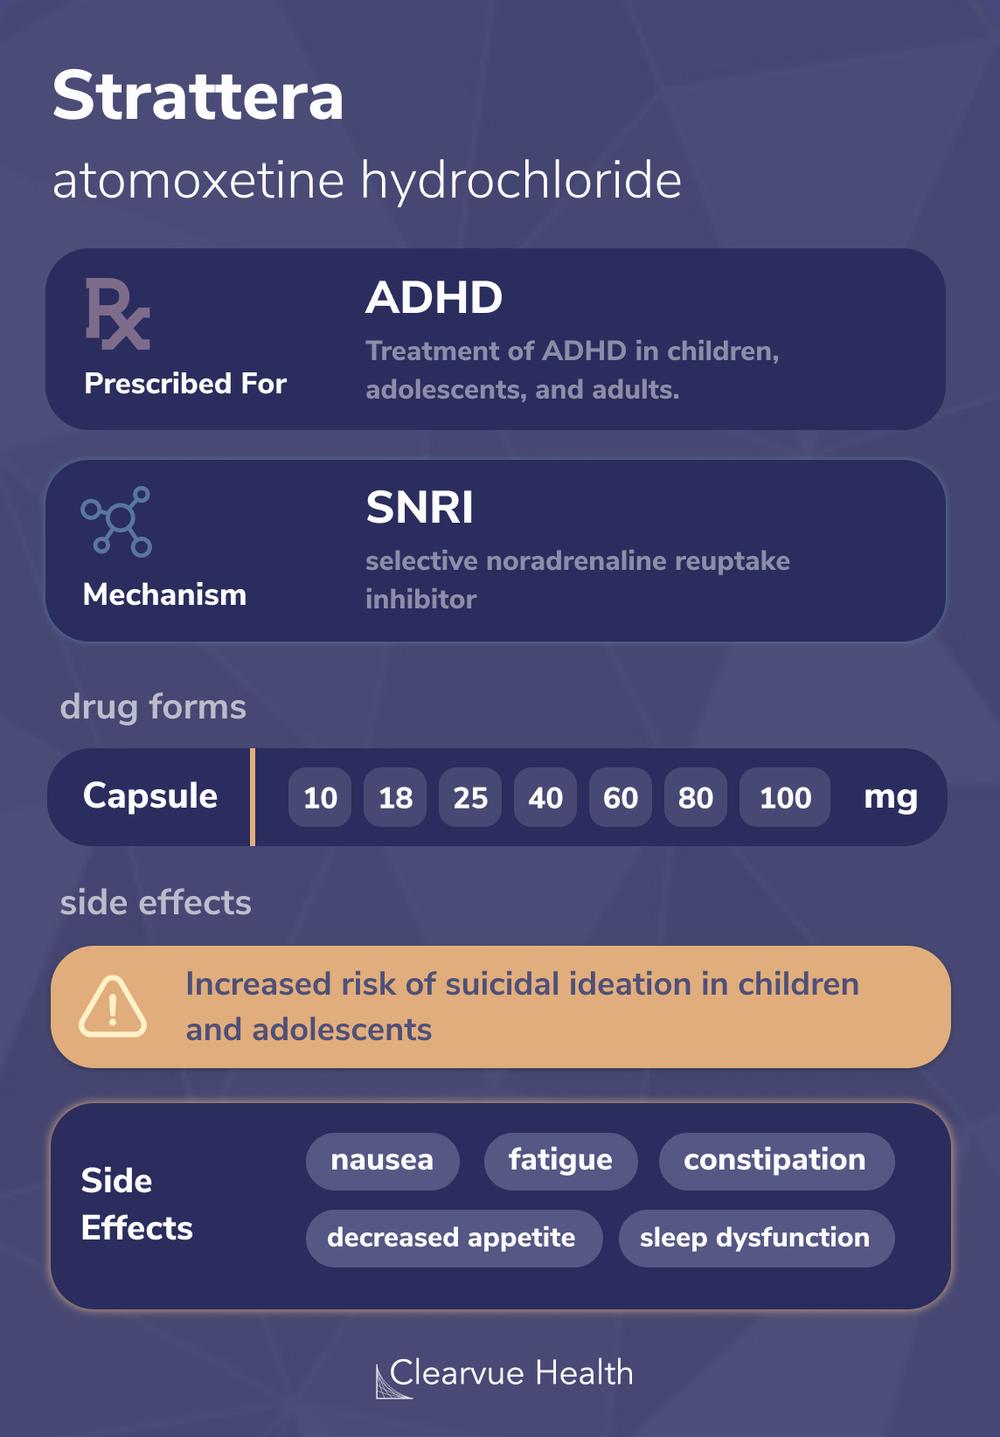 A blue and purple infographic with white text that provides information about Strattera, a medication used to treat ADHD.